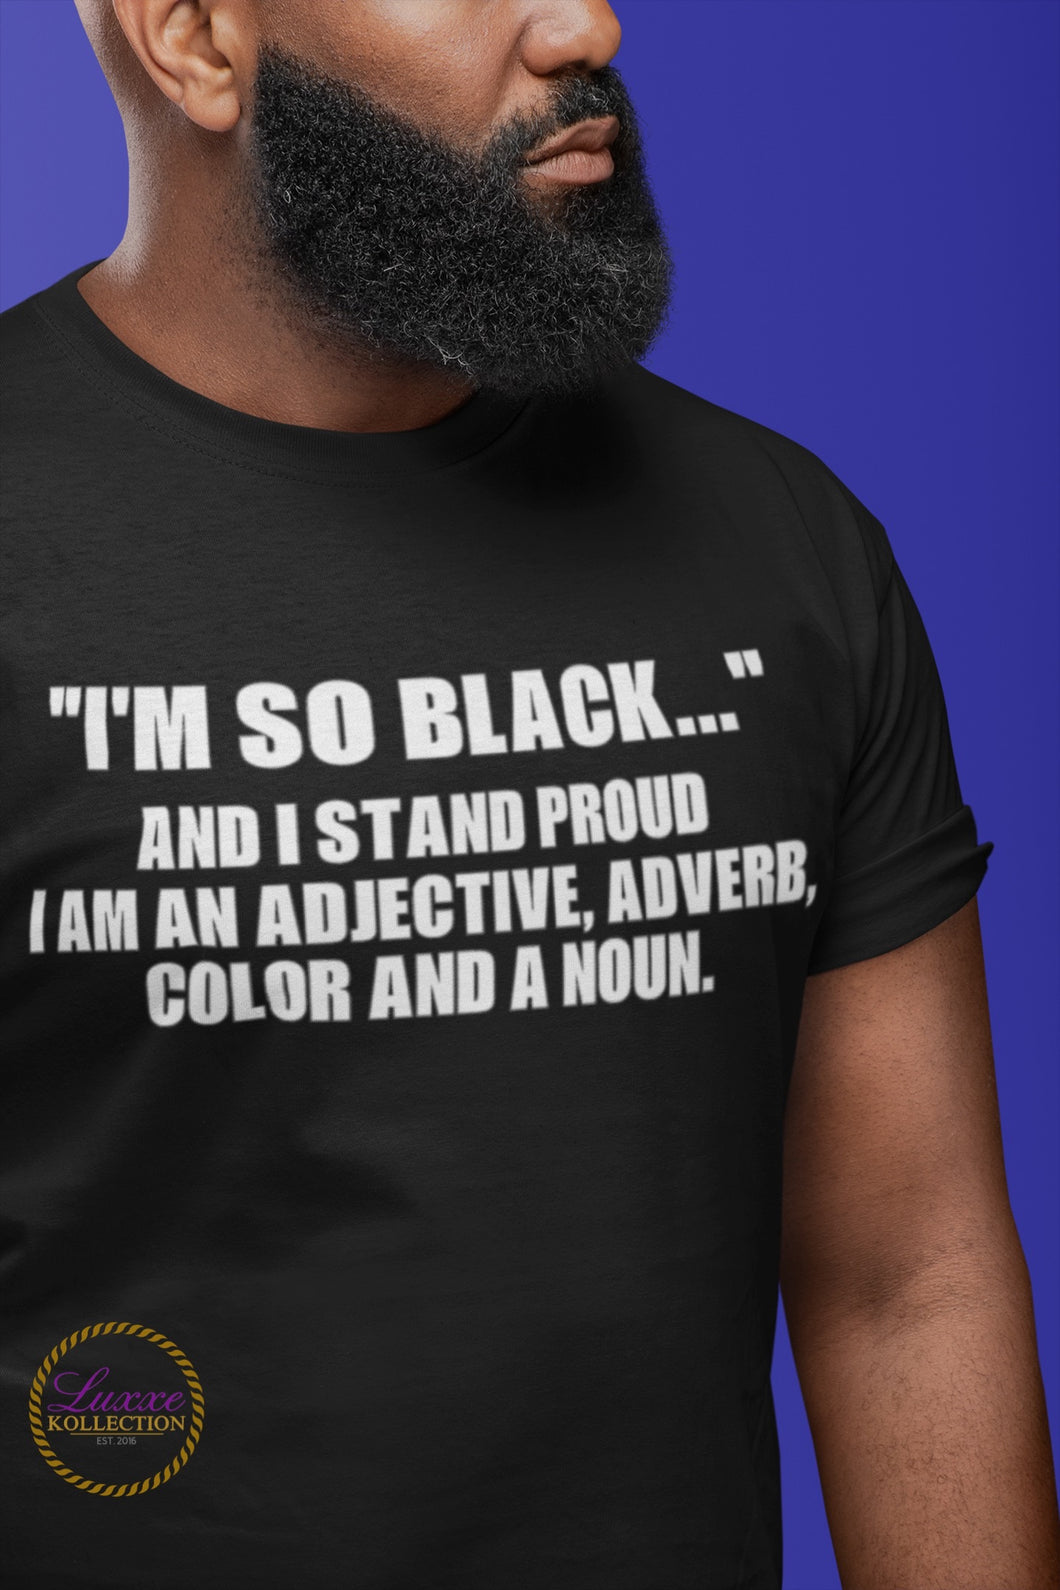 “I’M SO BLACK....” And I Stand Proud - I’m An Adjective, Adverb, Color And A Noun T-shirt